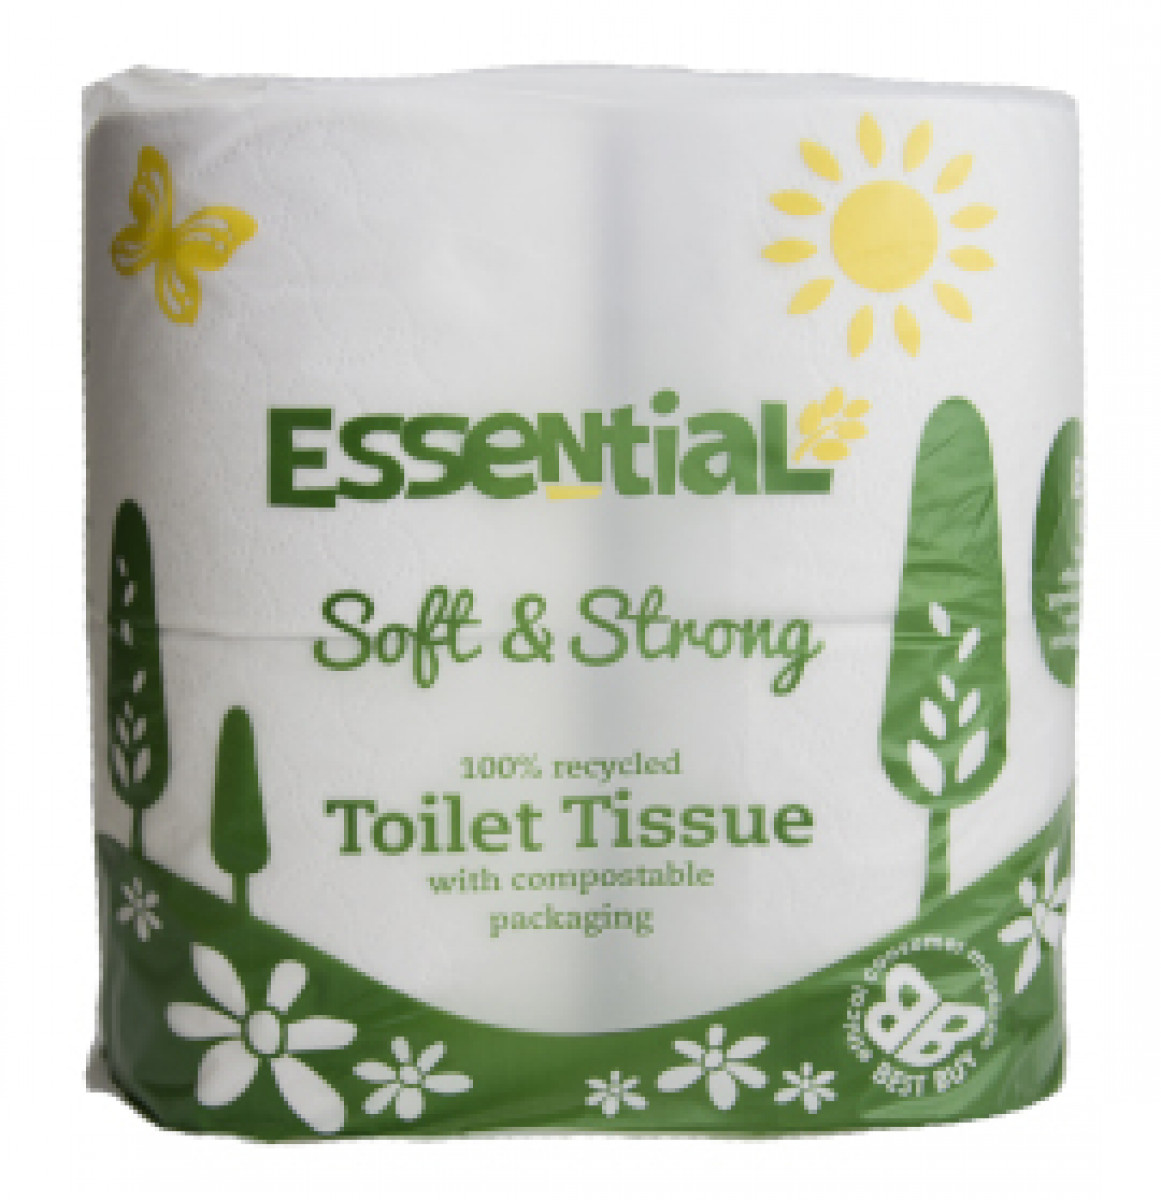 Product picture for Soft Toilet Tissue (Recycled) (Compostable film)